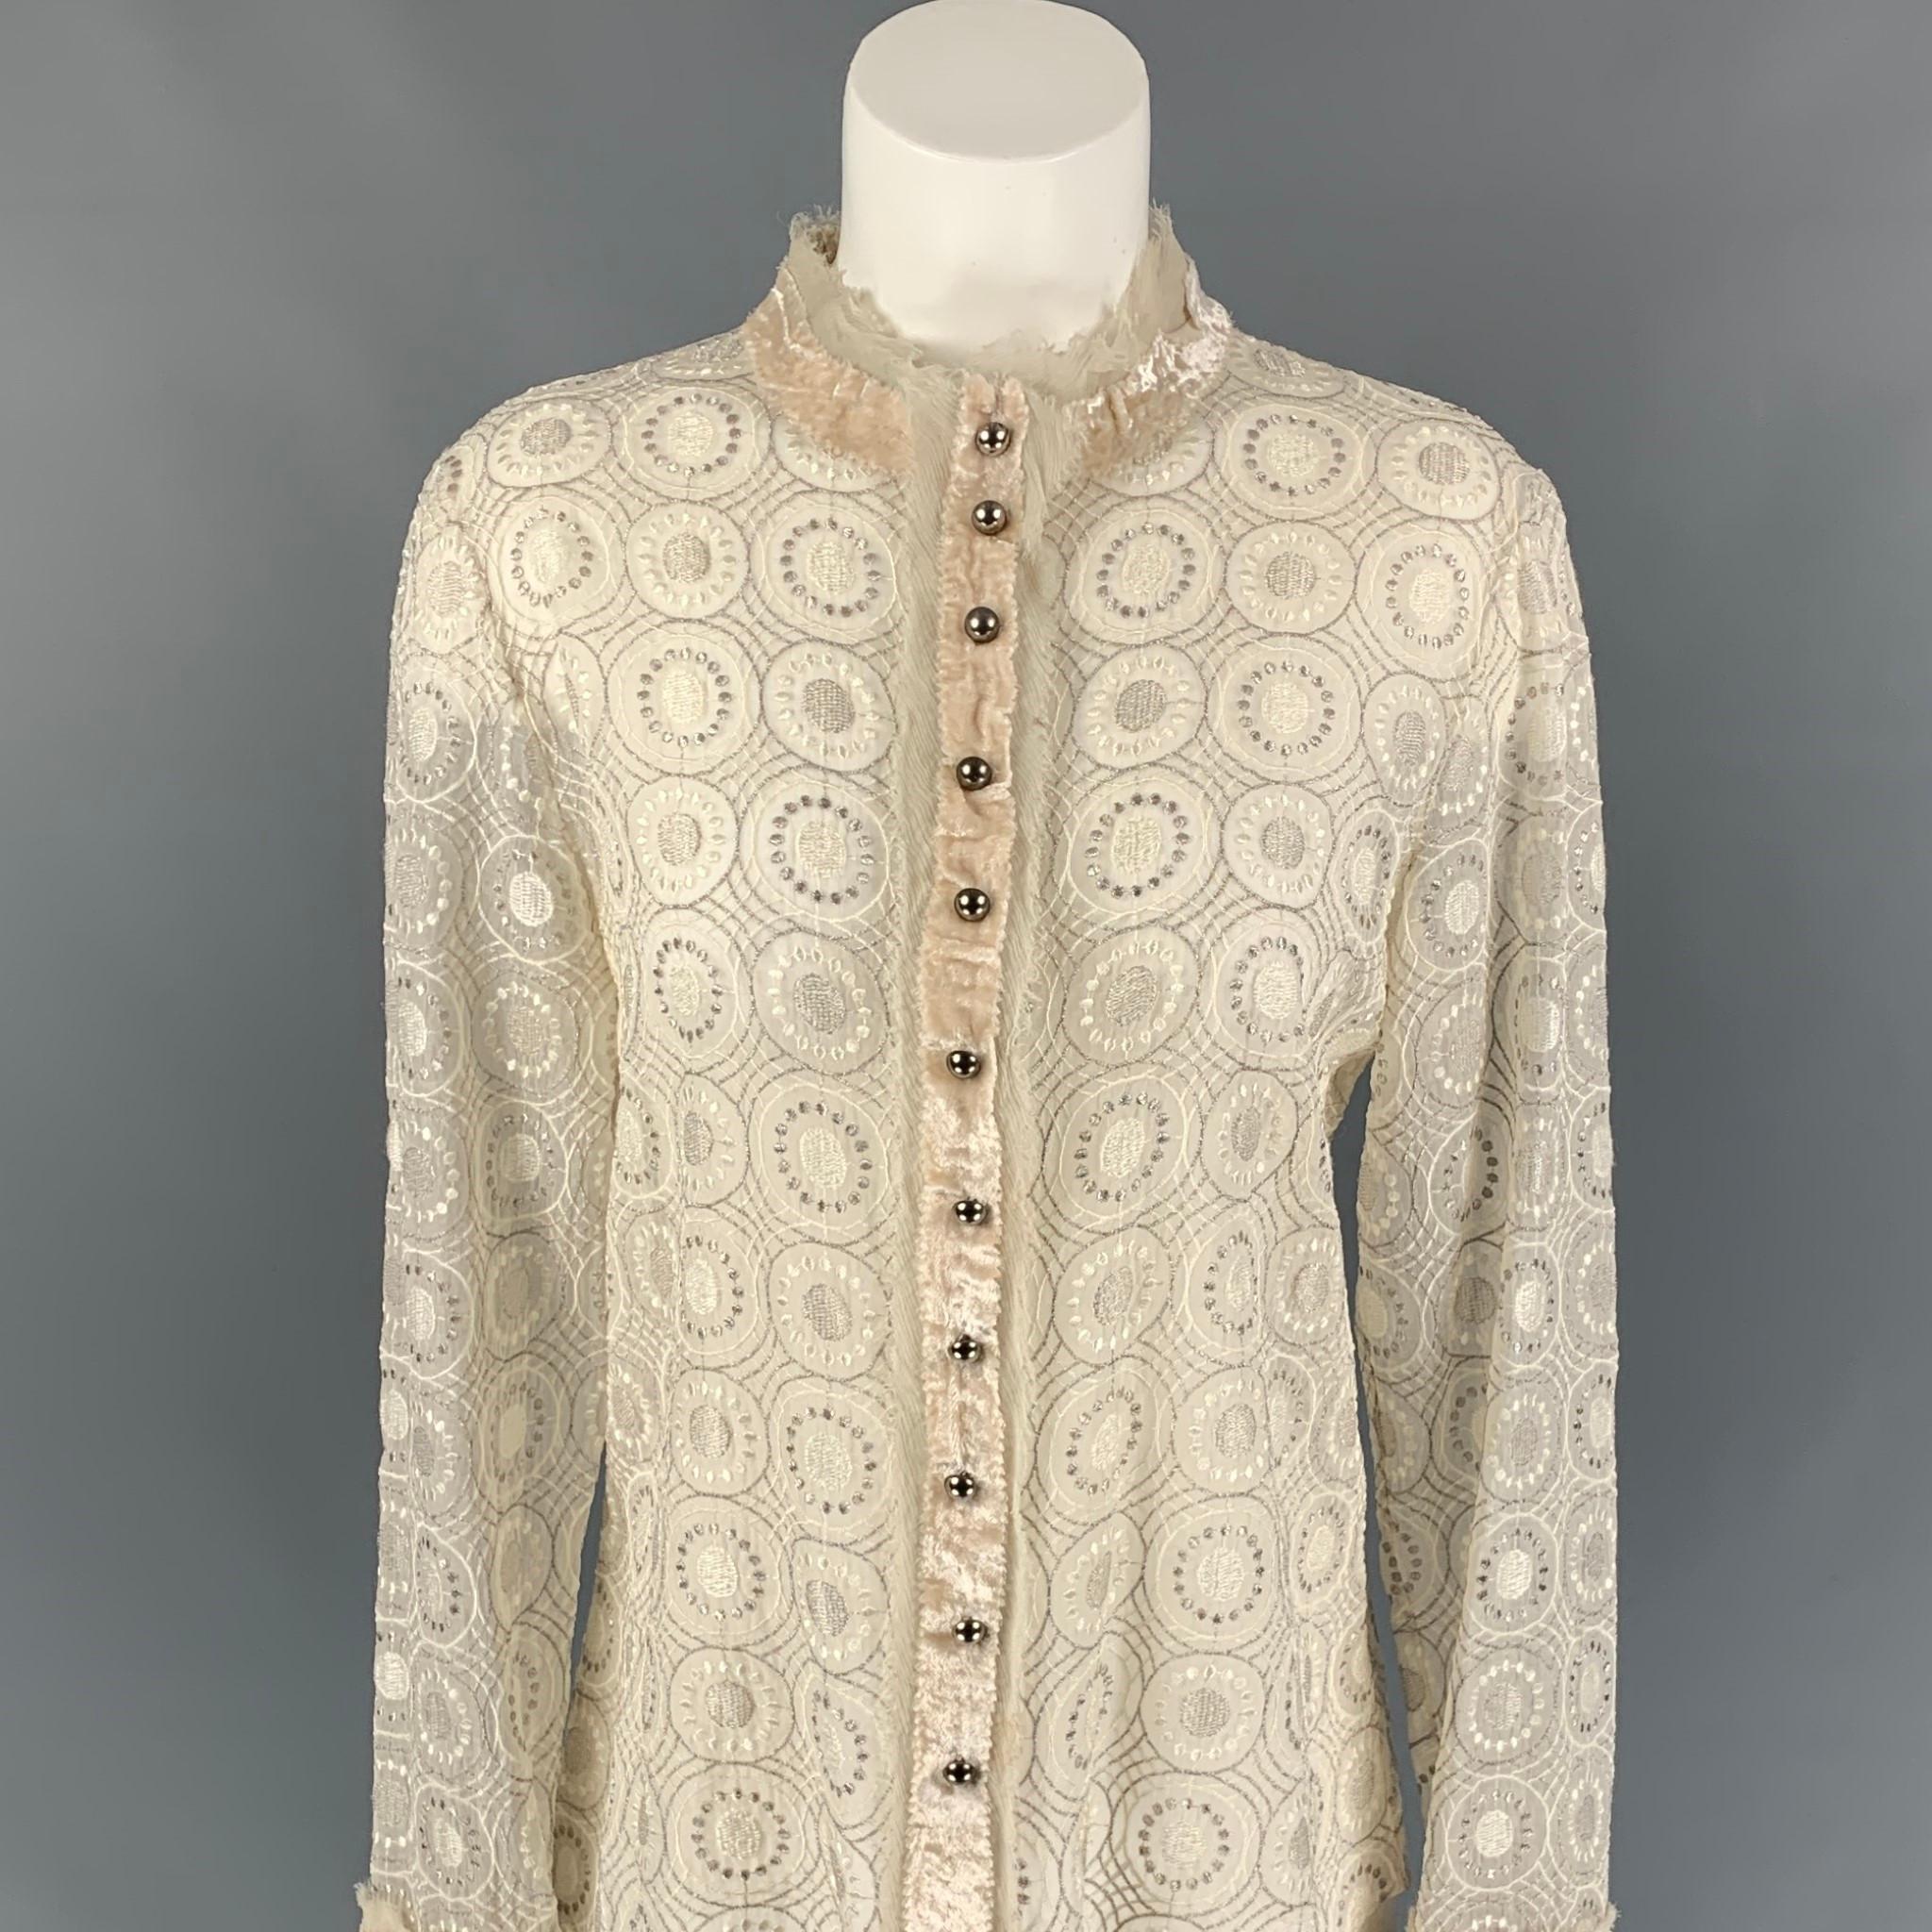 MARC JACOBS x BERGDORF GOODMAN blouse comes in a beige silk featuring metallic embroidery, raw edge, silver tone buttons, and a snap button closure. Made in USA. 

Very Good Pre-Owned Condition.
Marked: 6

Measurements:

Shoulder: 16.5 in.
Bust: 36